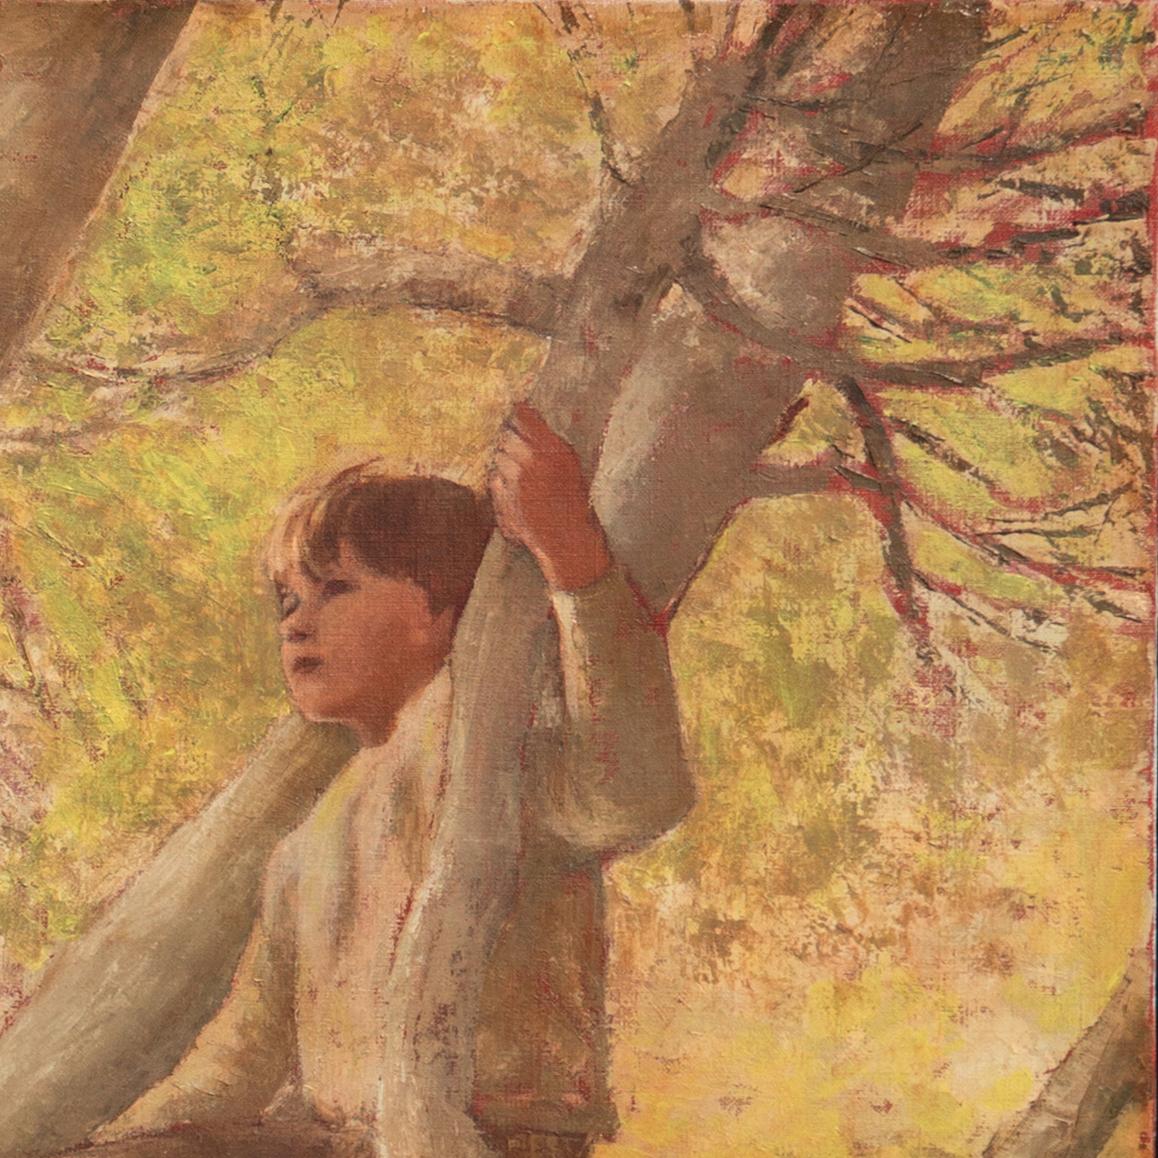 'In the Sycamore', Large Figural Oil, Carmel, California Woman Artist, Muralist  - Modern Painting by Helen Rayburn Caswell